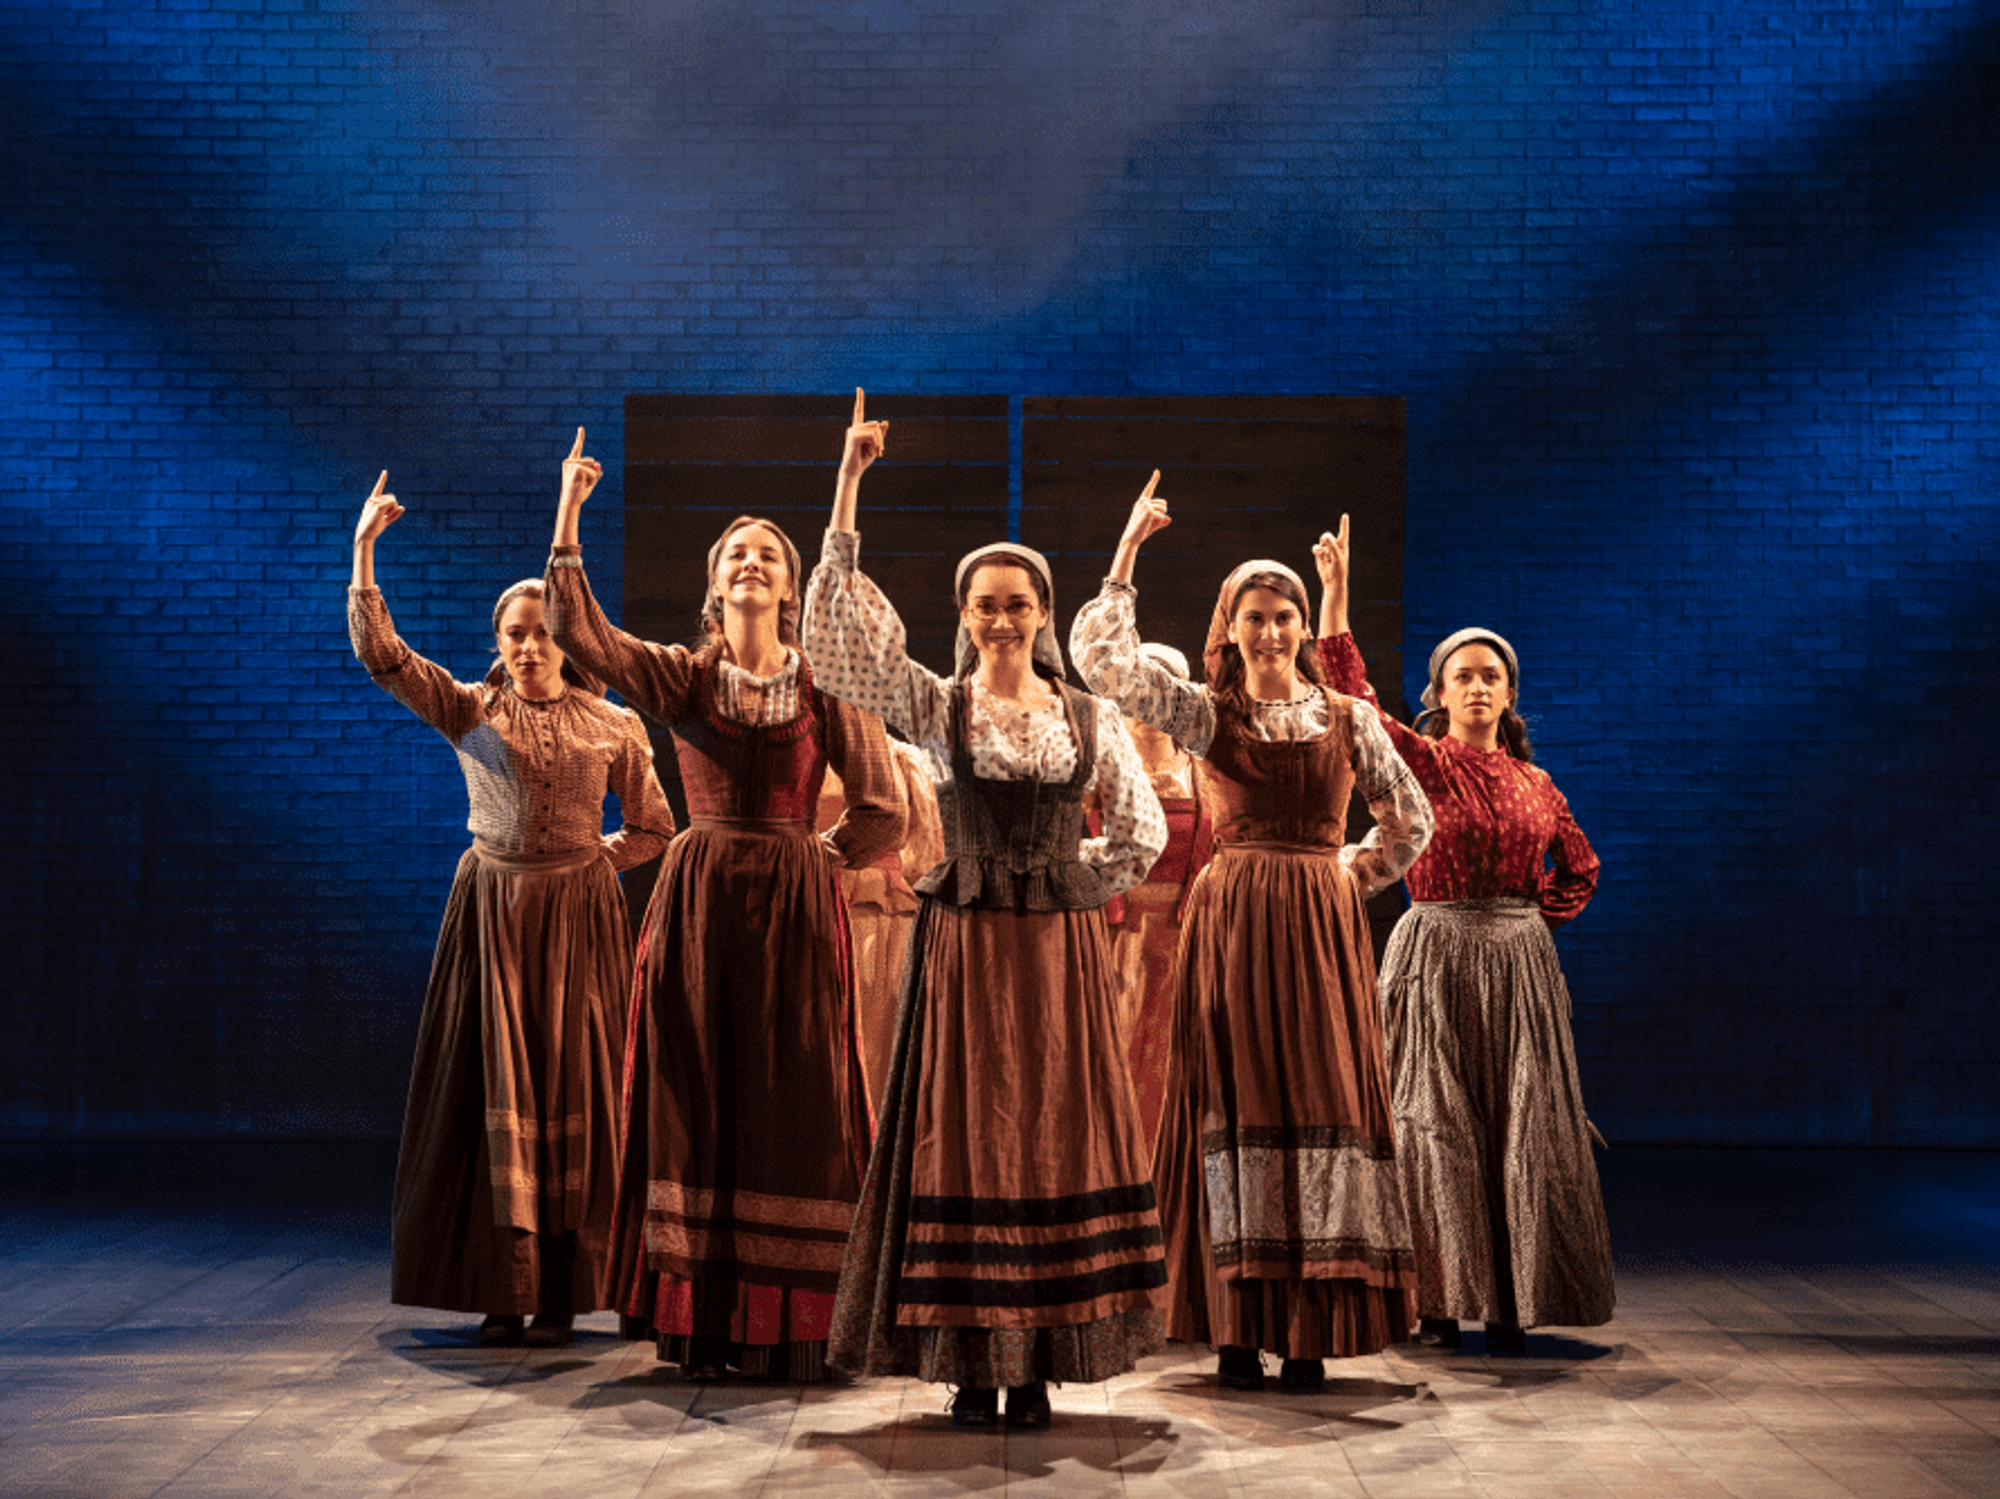 See beloved Broadway musical Fiddler on the Roof at Majestic Theatre this weekend only.